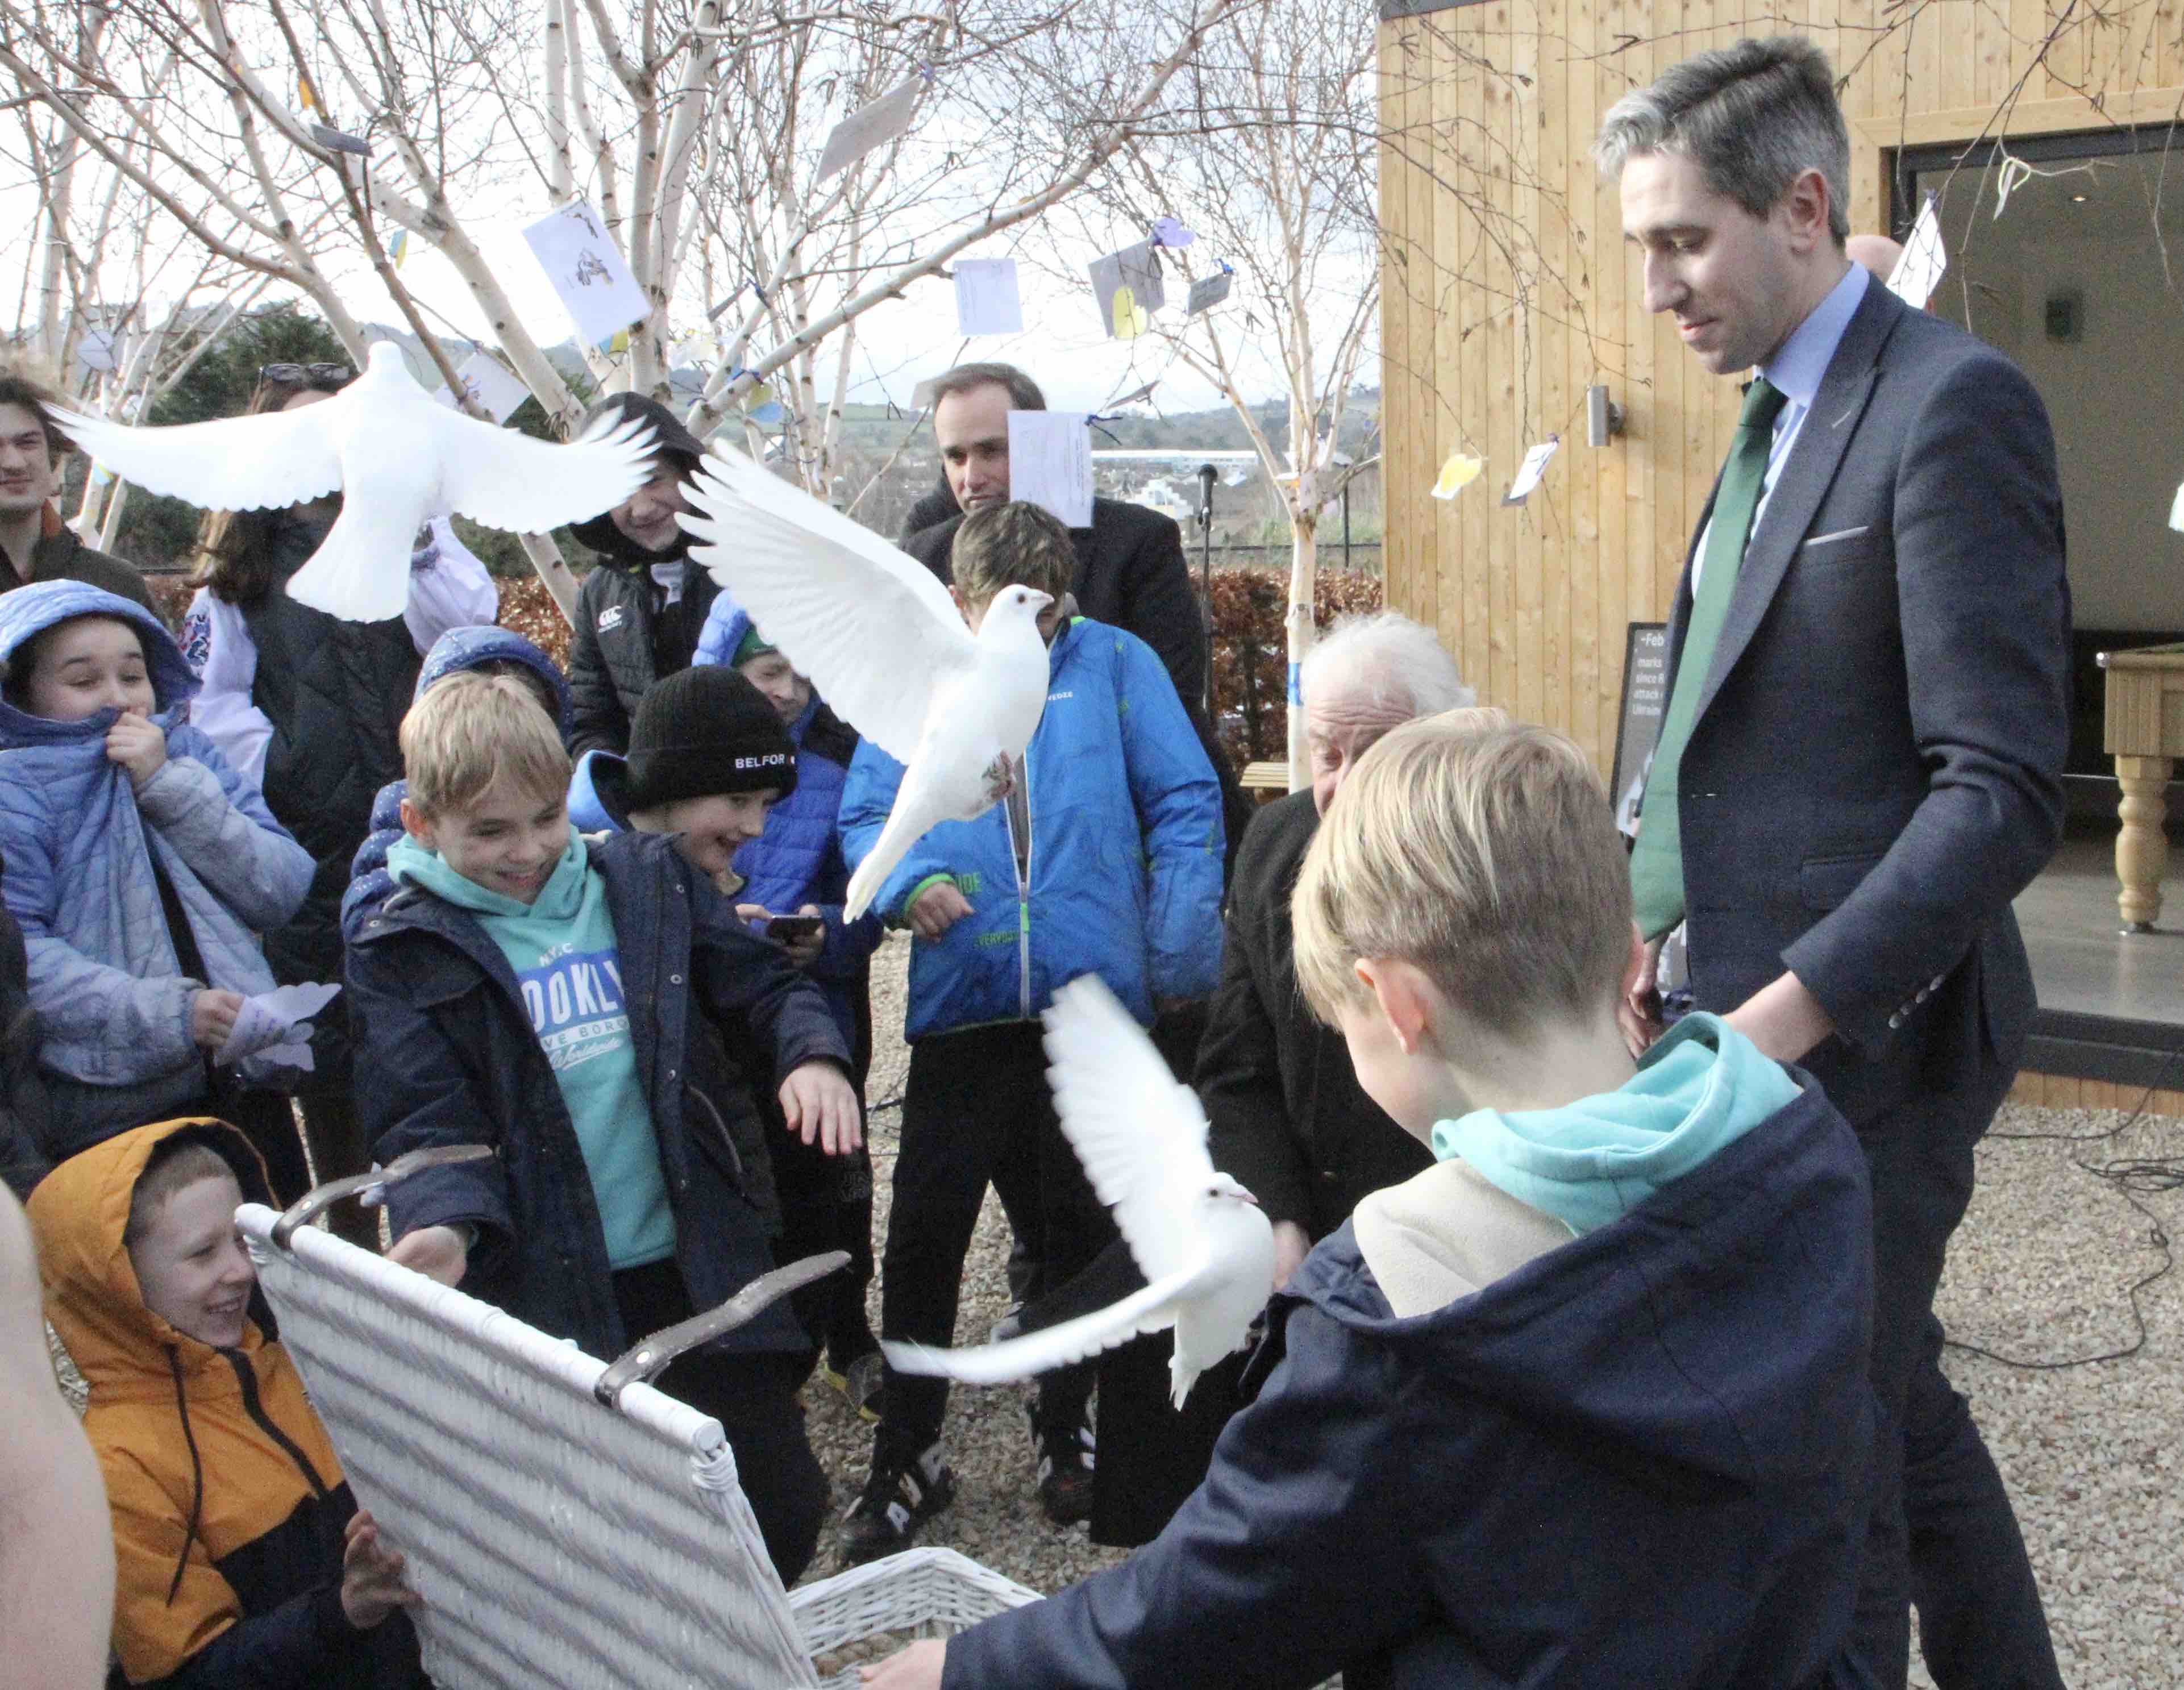 Children from Ukraine, assisted by Archbishop Michael Jackson and Minister Simon Harris, release doves as a symbol of their wish for peace.